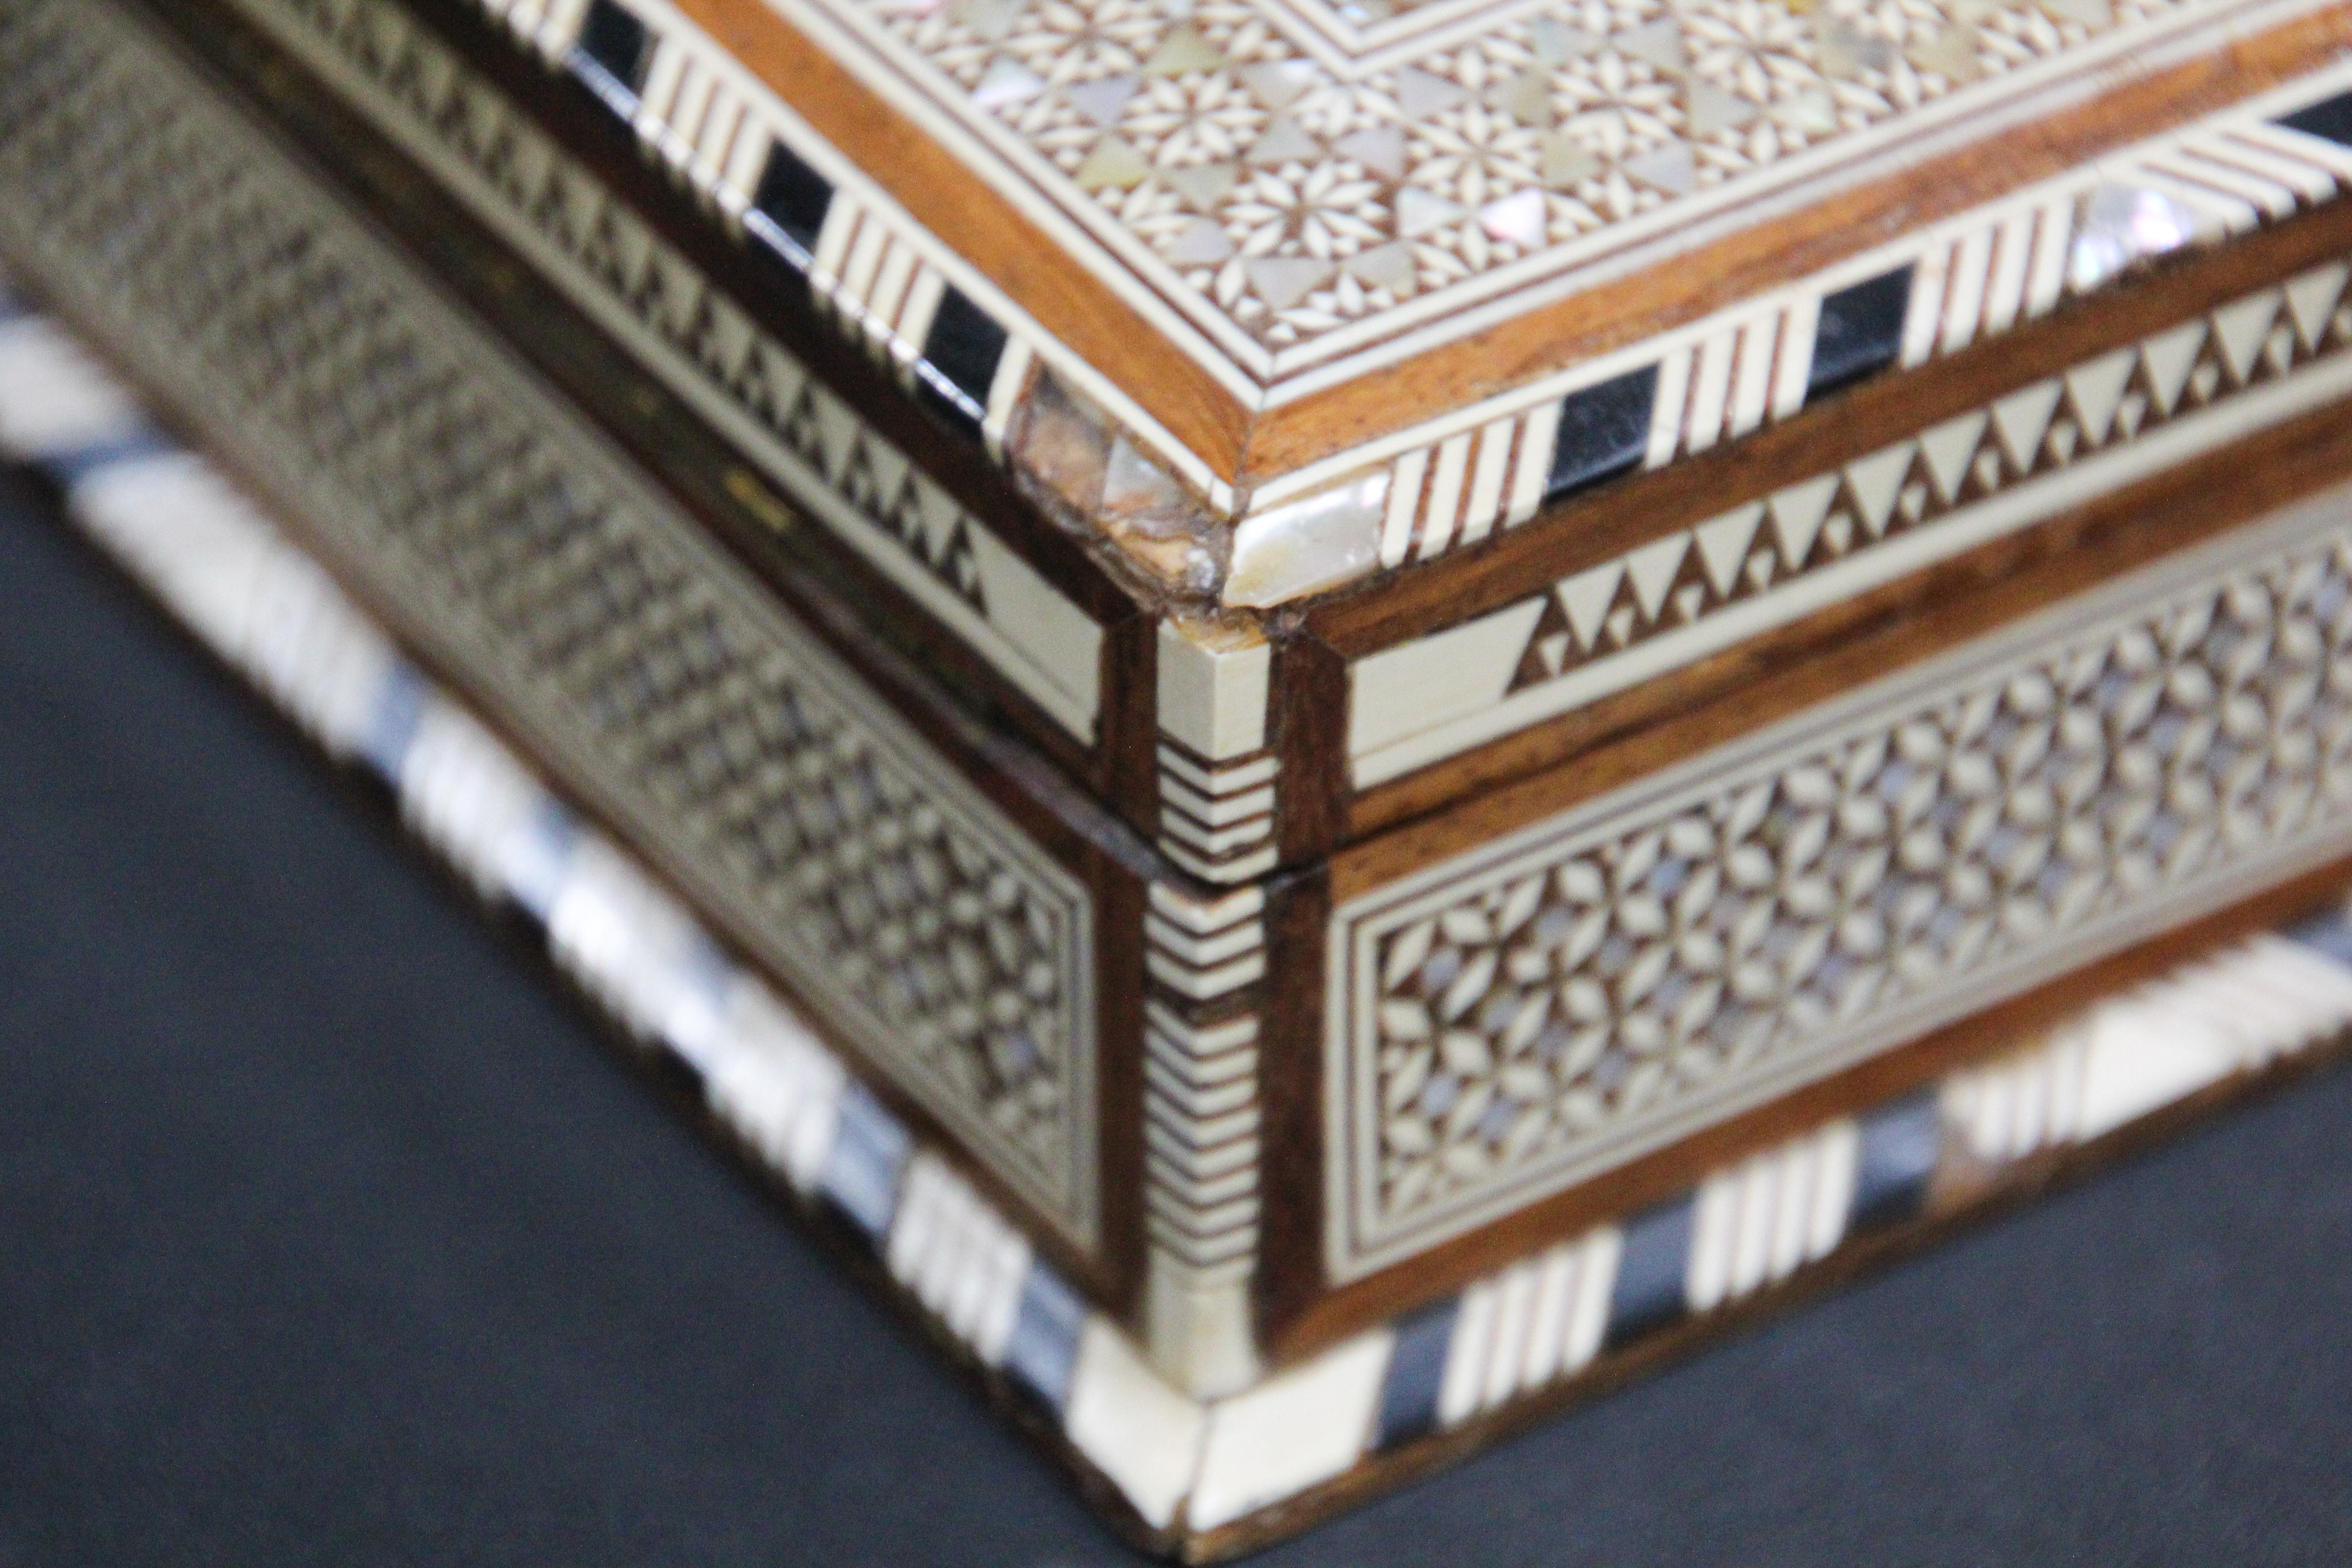 Moorish Handcrafted Middle Eastern Mosaic Inlaid Decorative Box For Sale 6